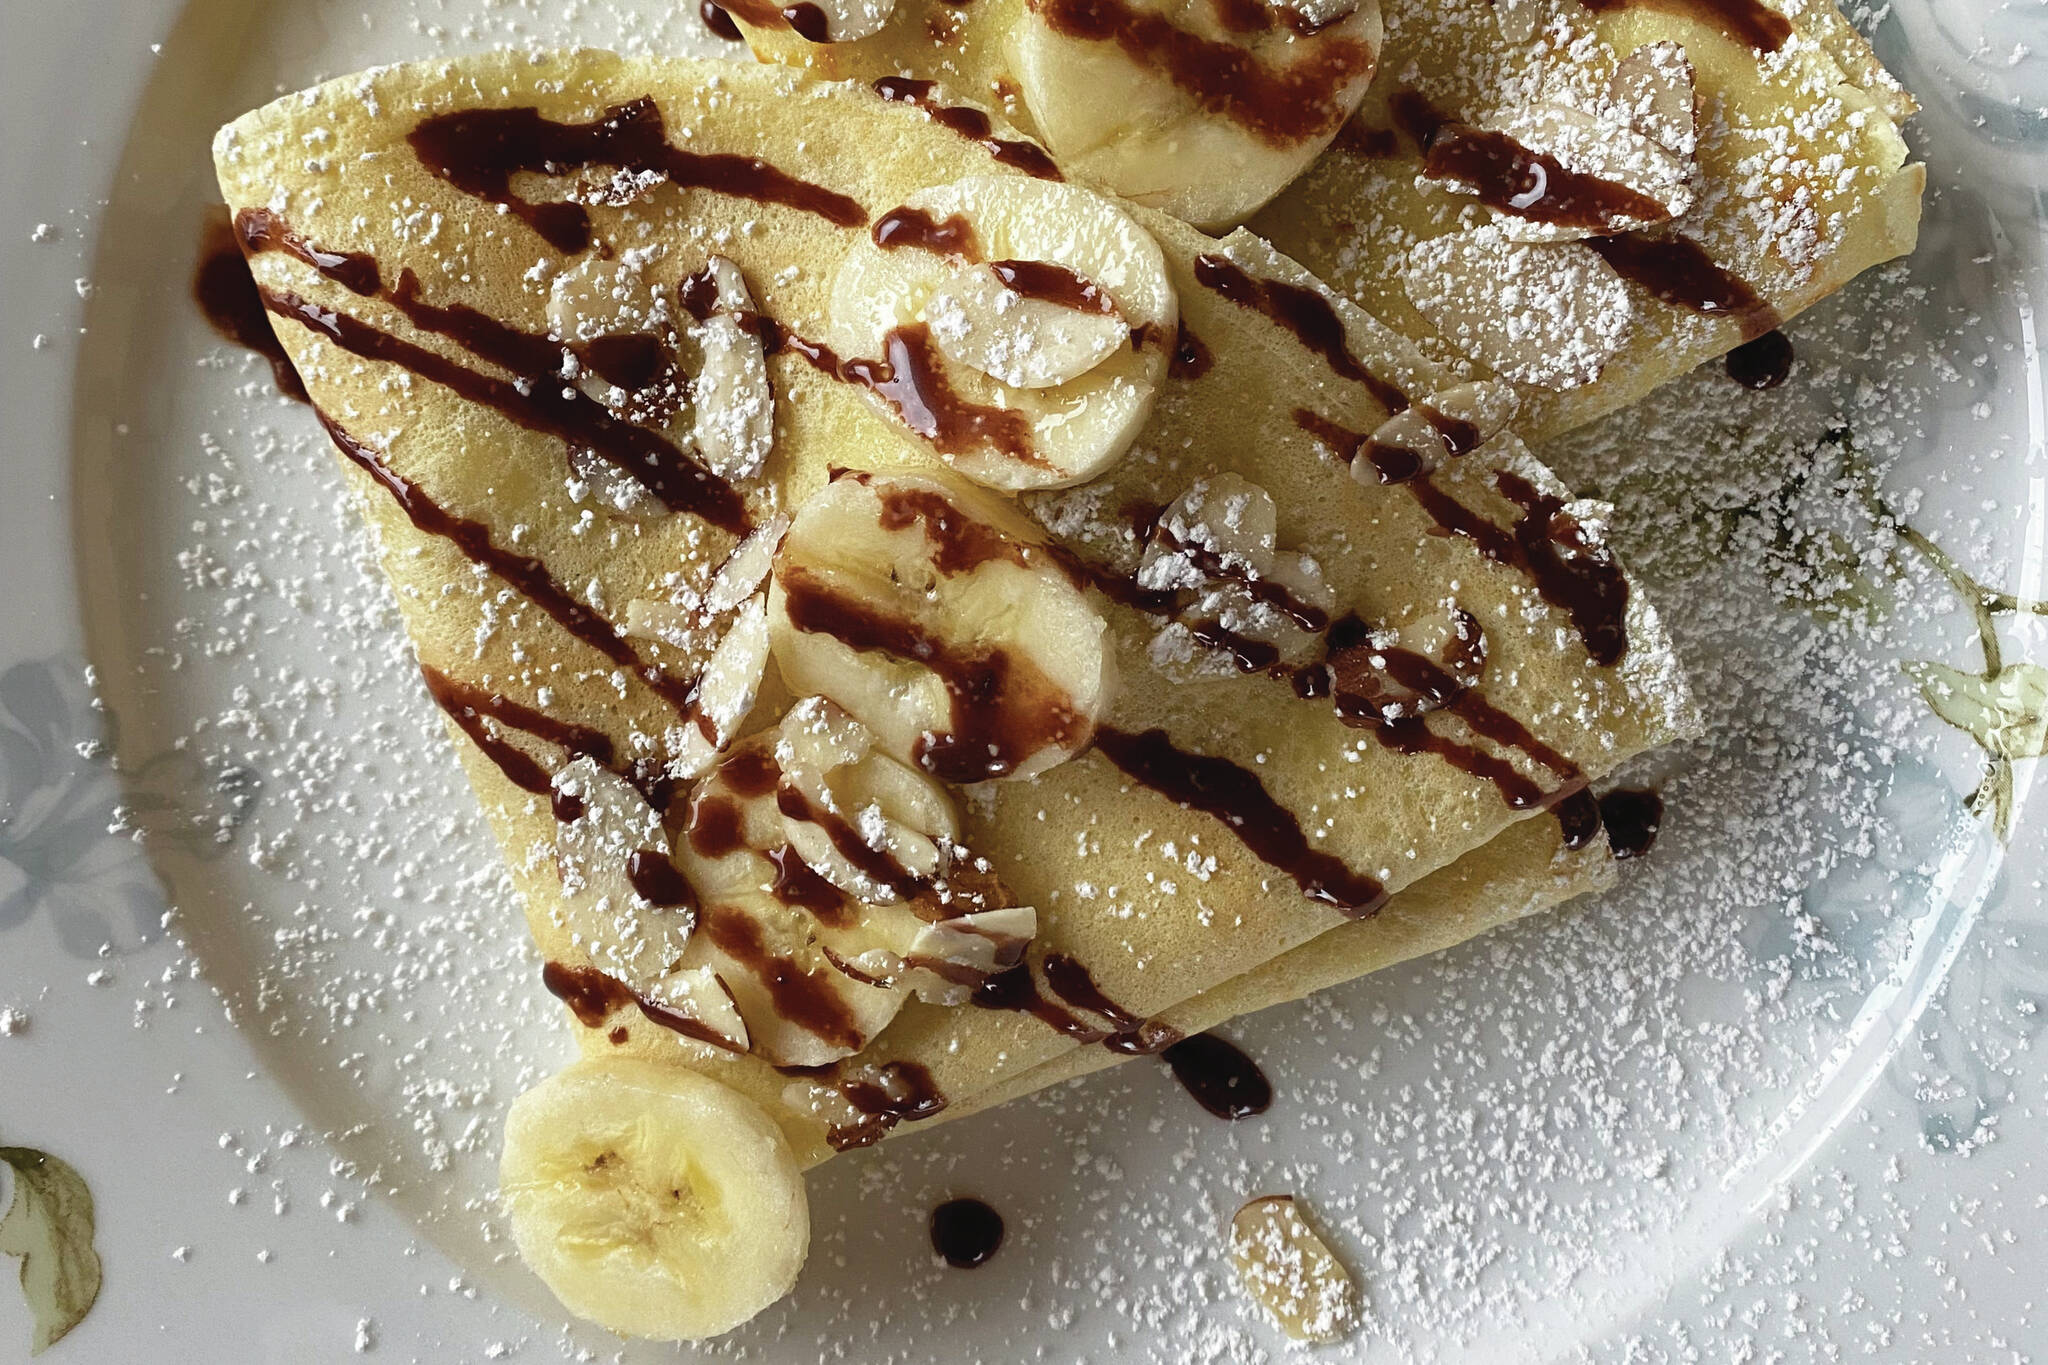 The simple yet versatile crepe can be served savory or sweet, such as this banana, powdered sugar and chocolate creation. (Photo by Tressa Dale/Peninsula Clarion)